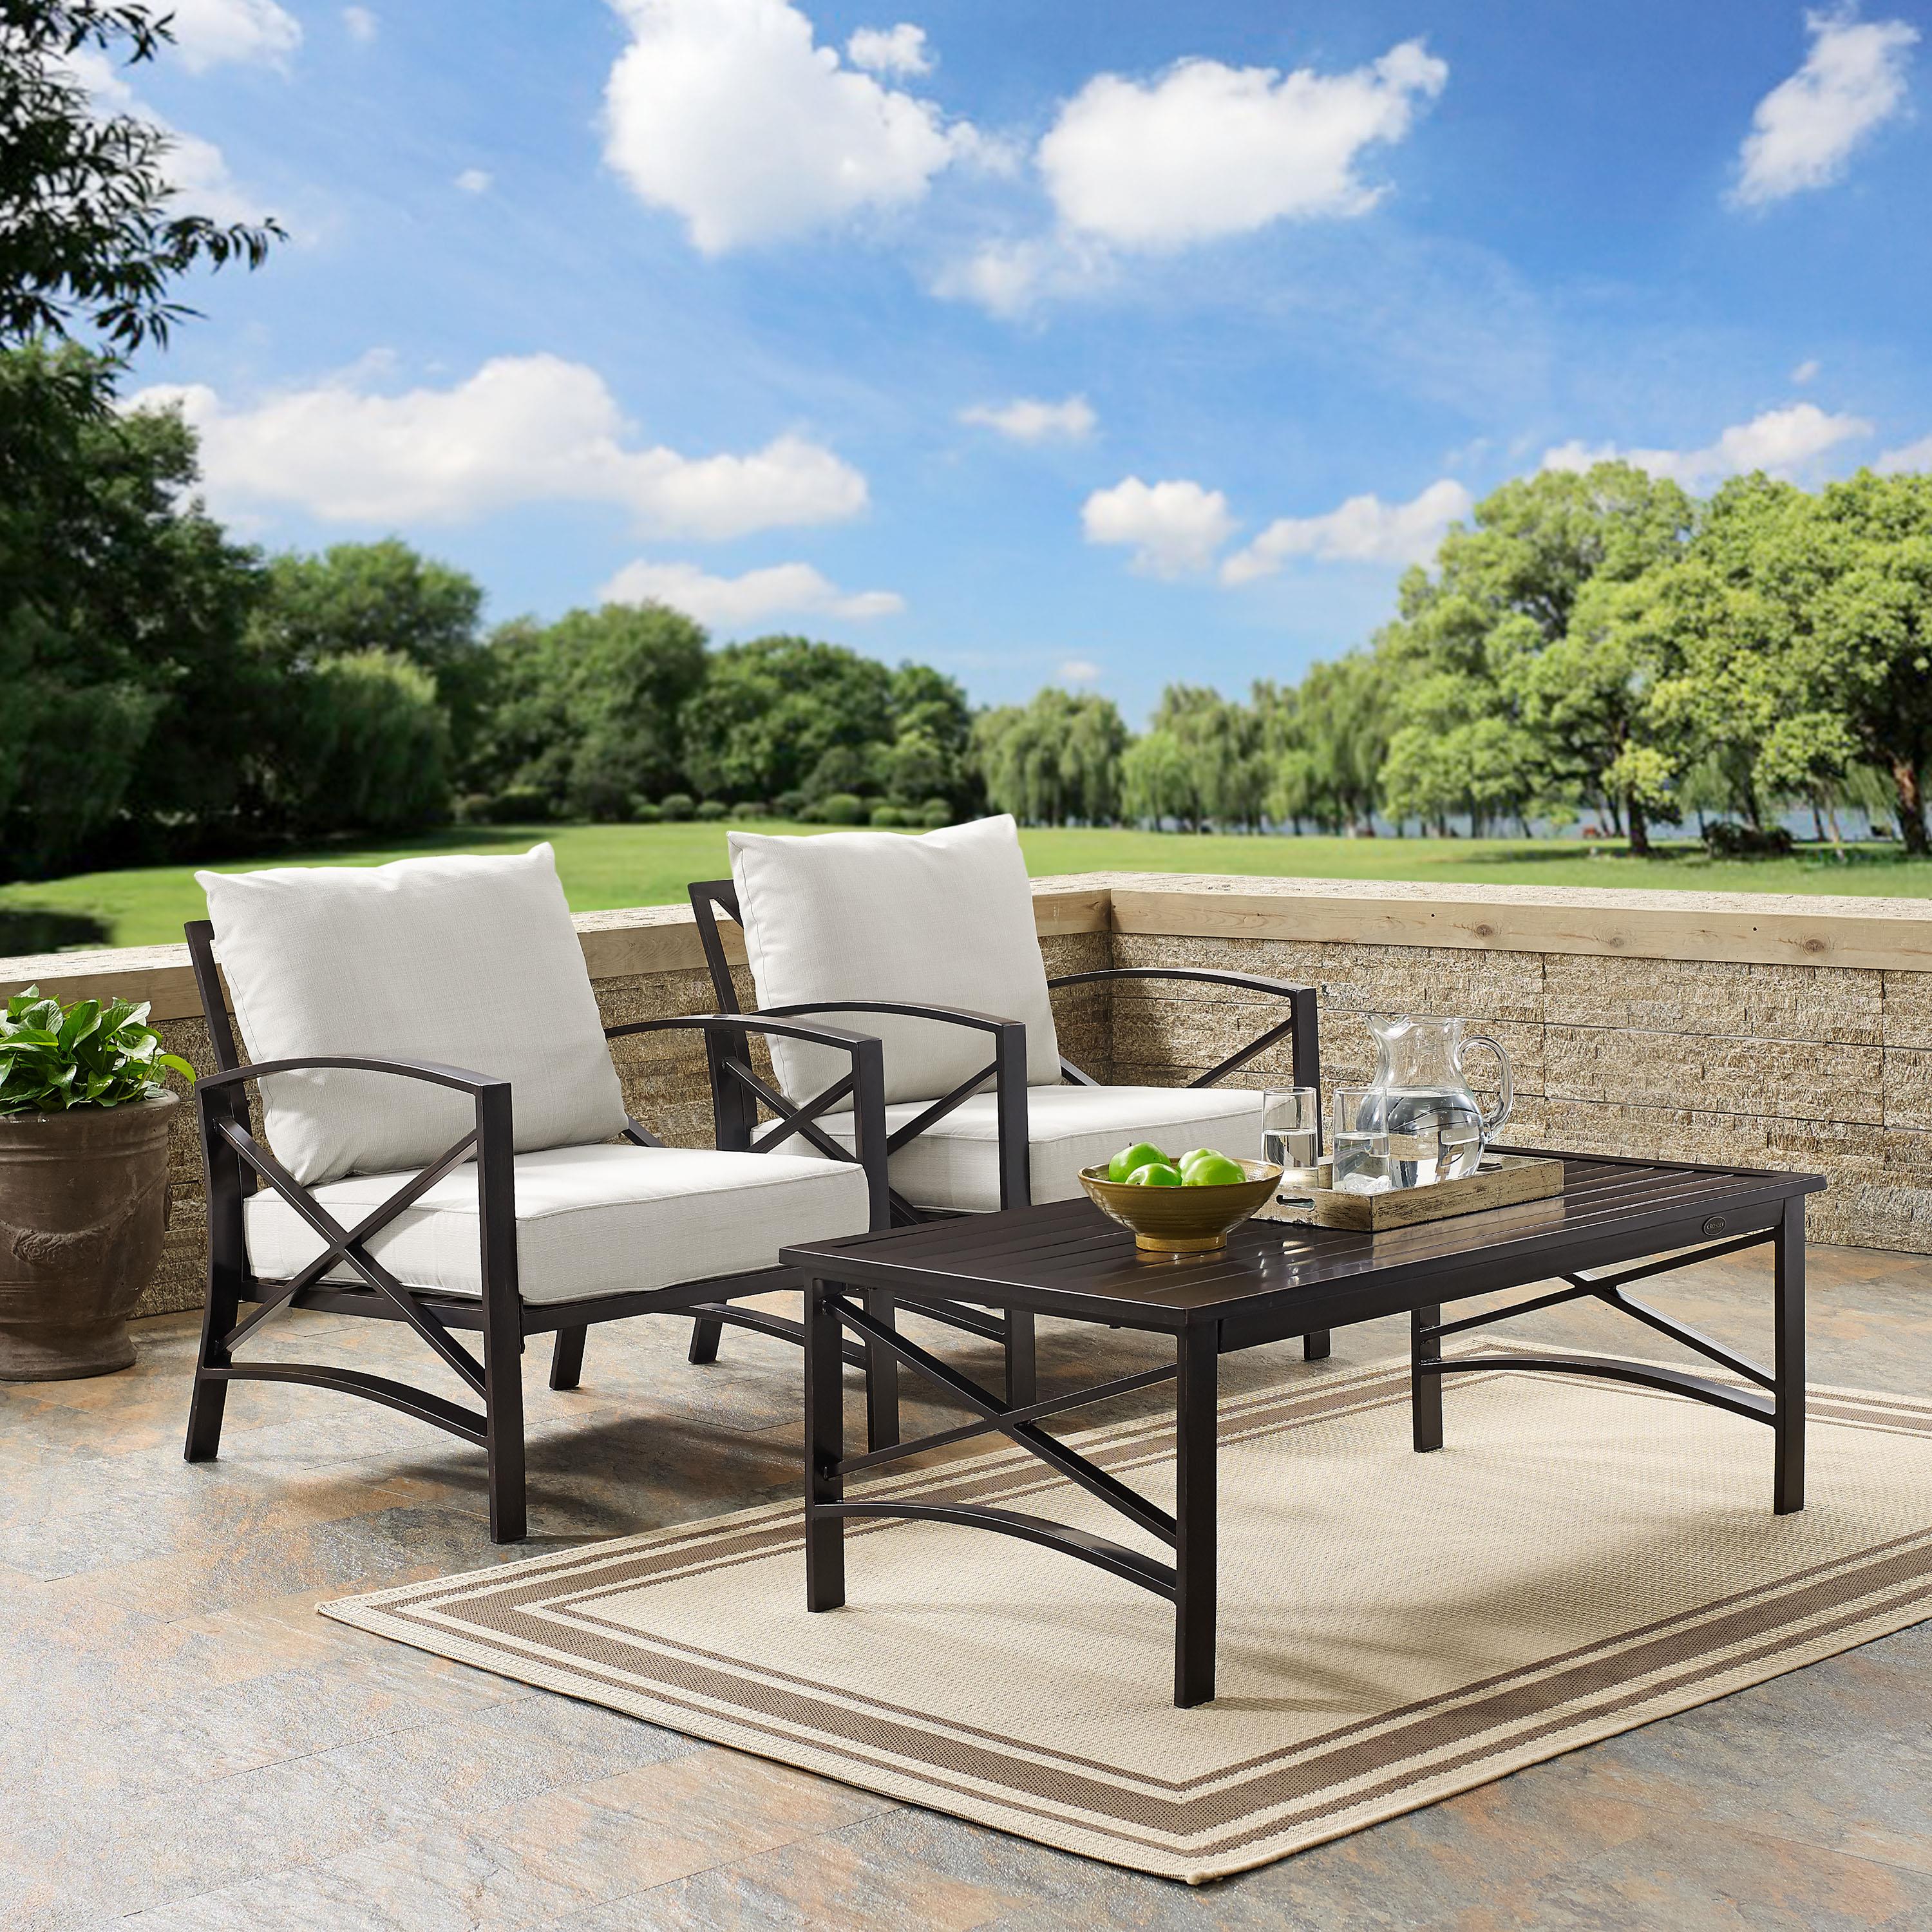 Crosley Furniture Kaplan 3 Pc Outdoor Seating Set With Oatmeal Cushion - Two Outdoor Chairs, Coffee Table - image 3 of 8